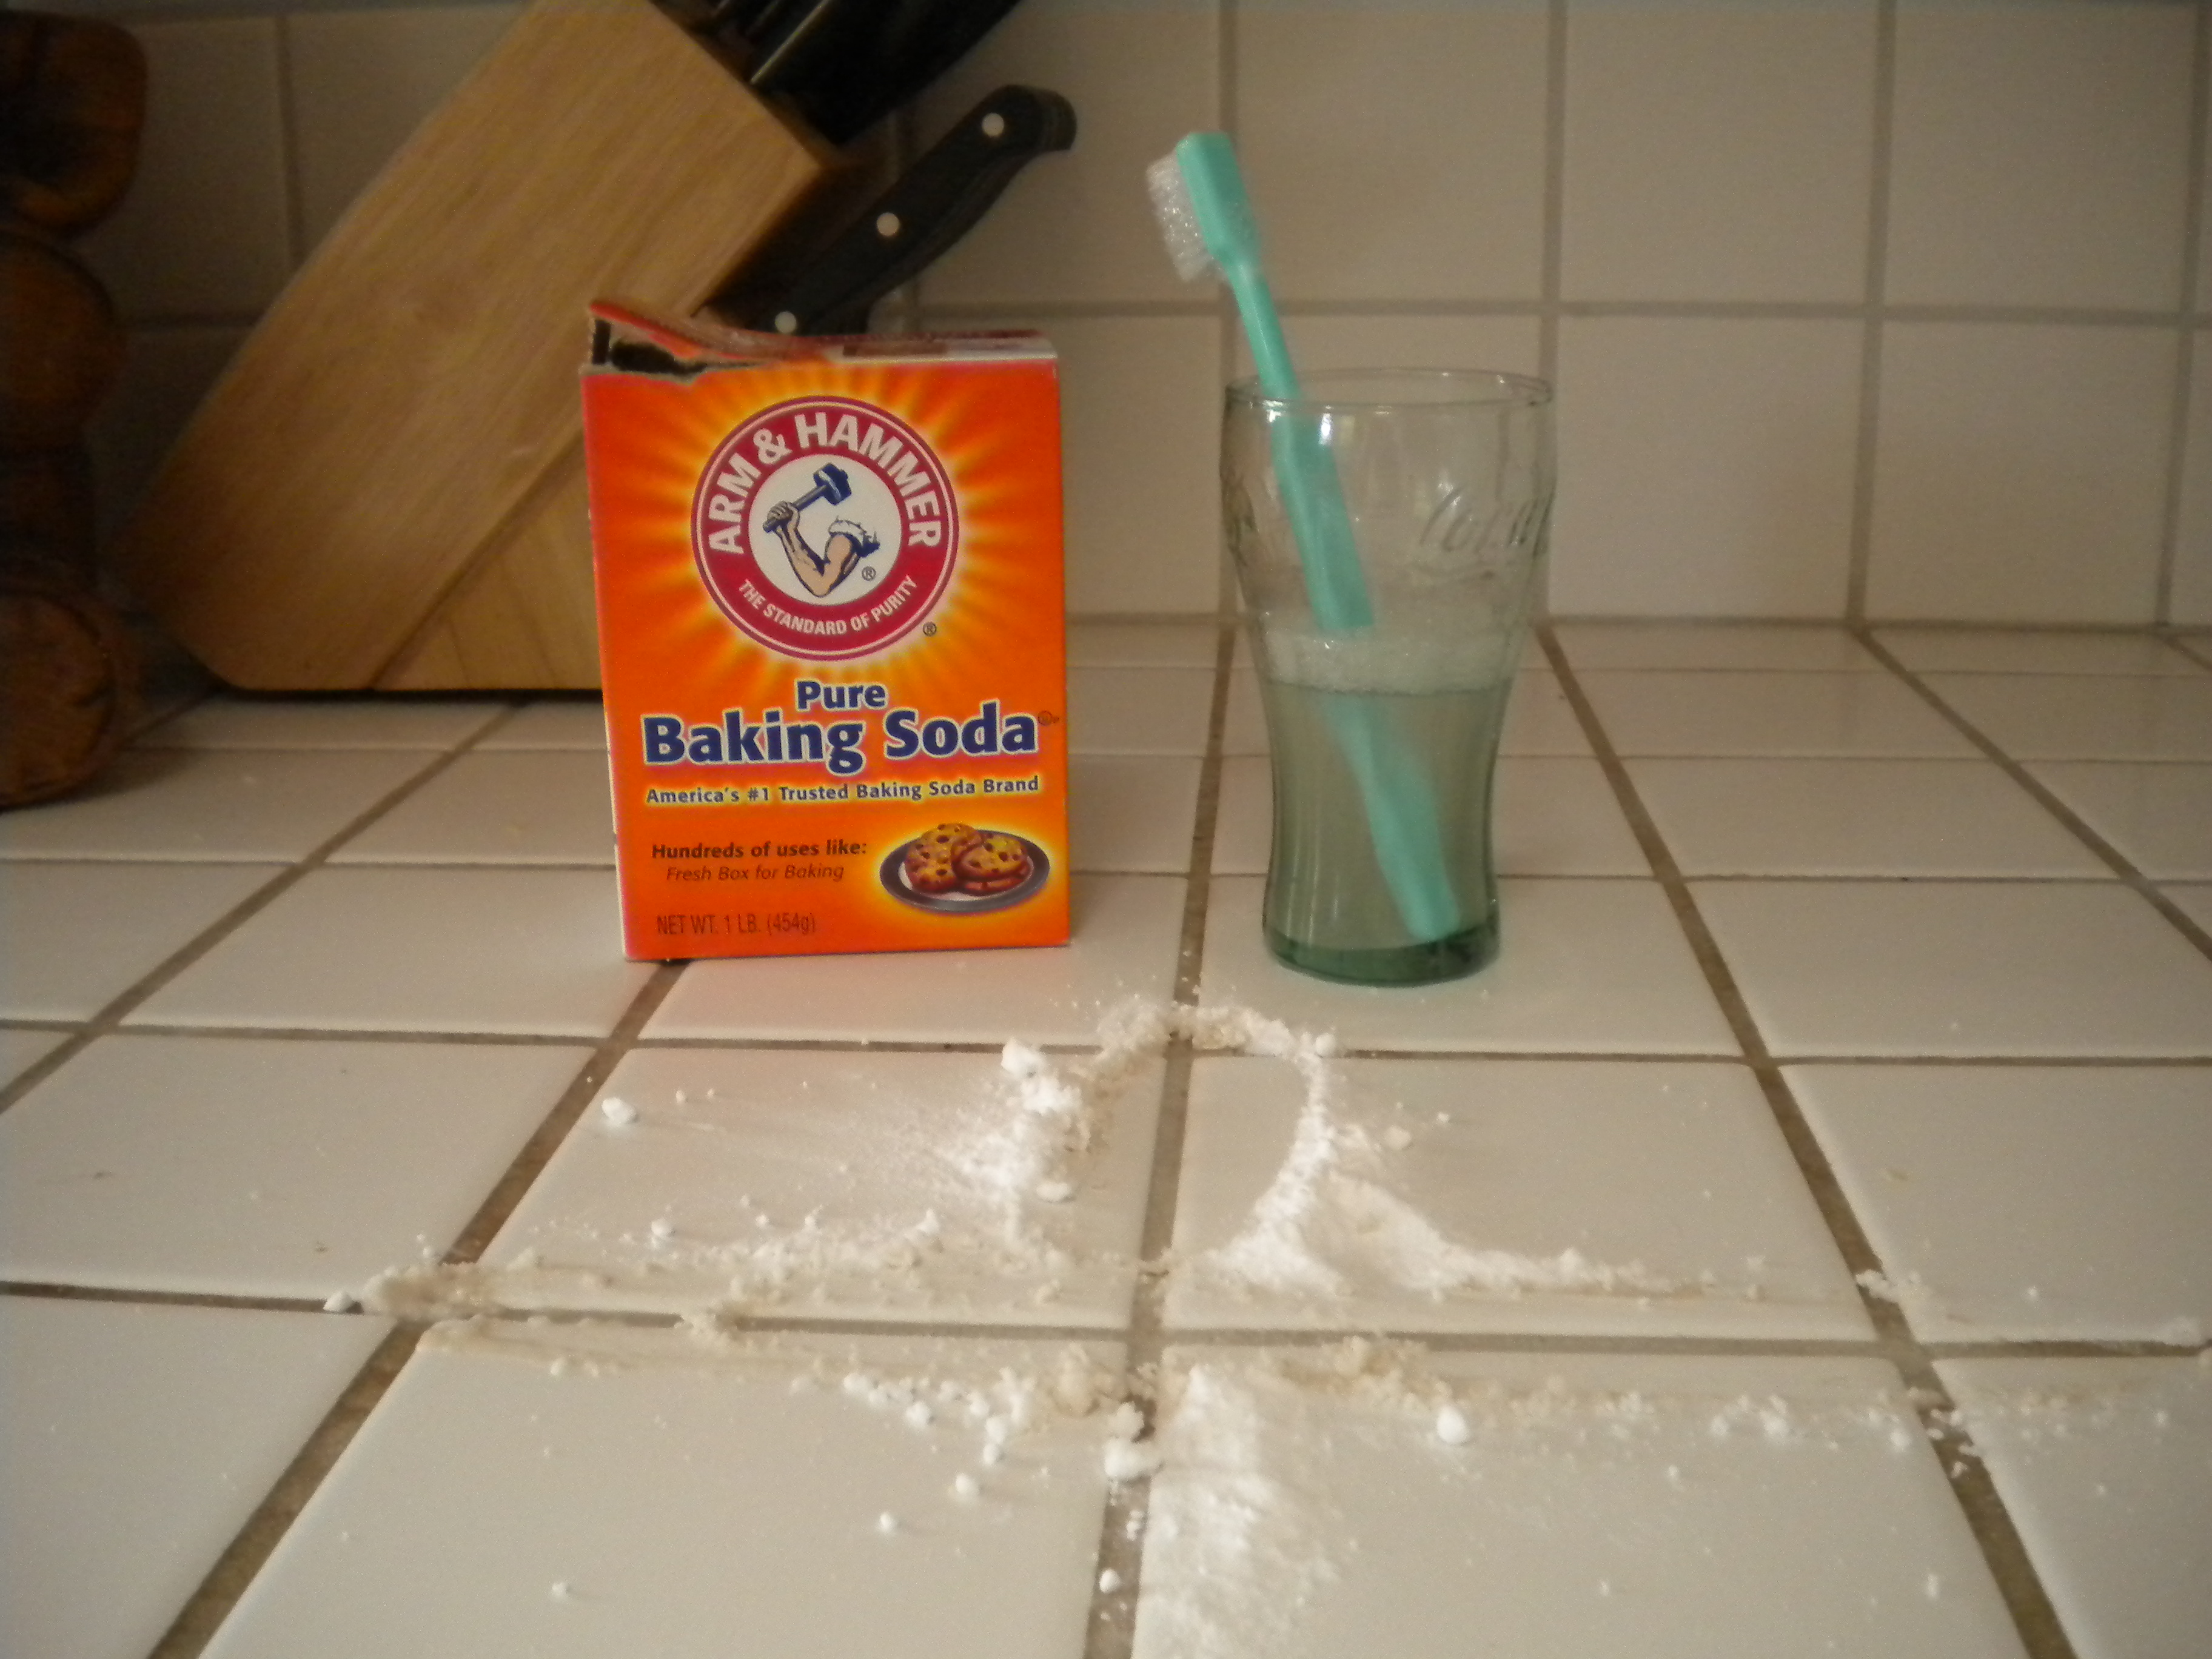 How To Clean Bathroom Tiles Methods, How To Clean Tile Floor With Vinegar And Baking Soda